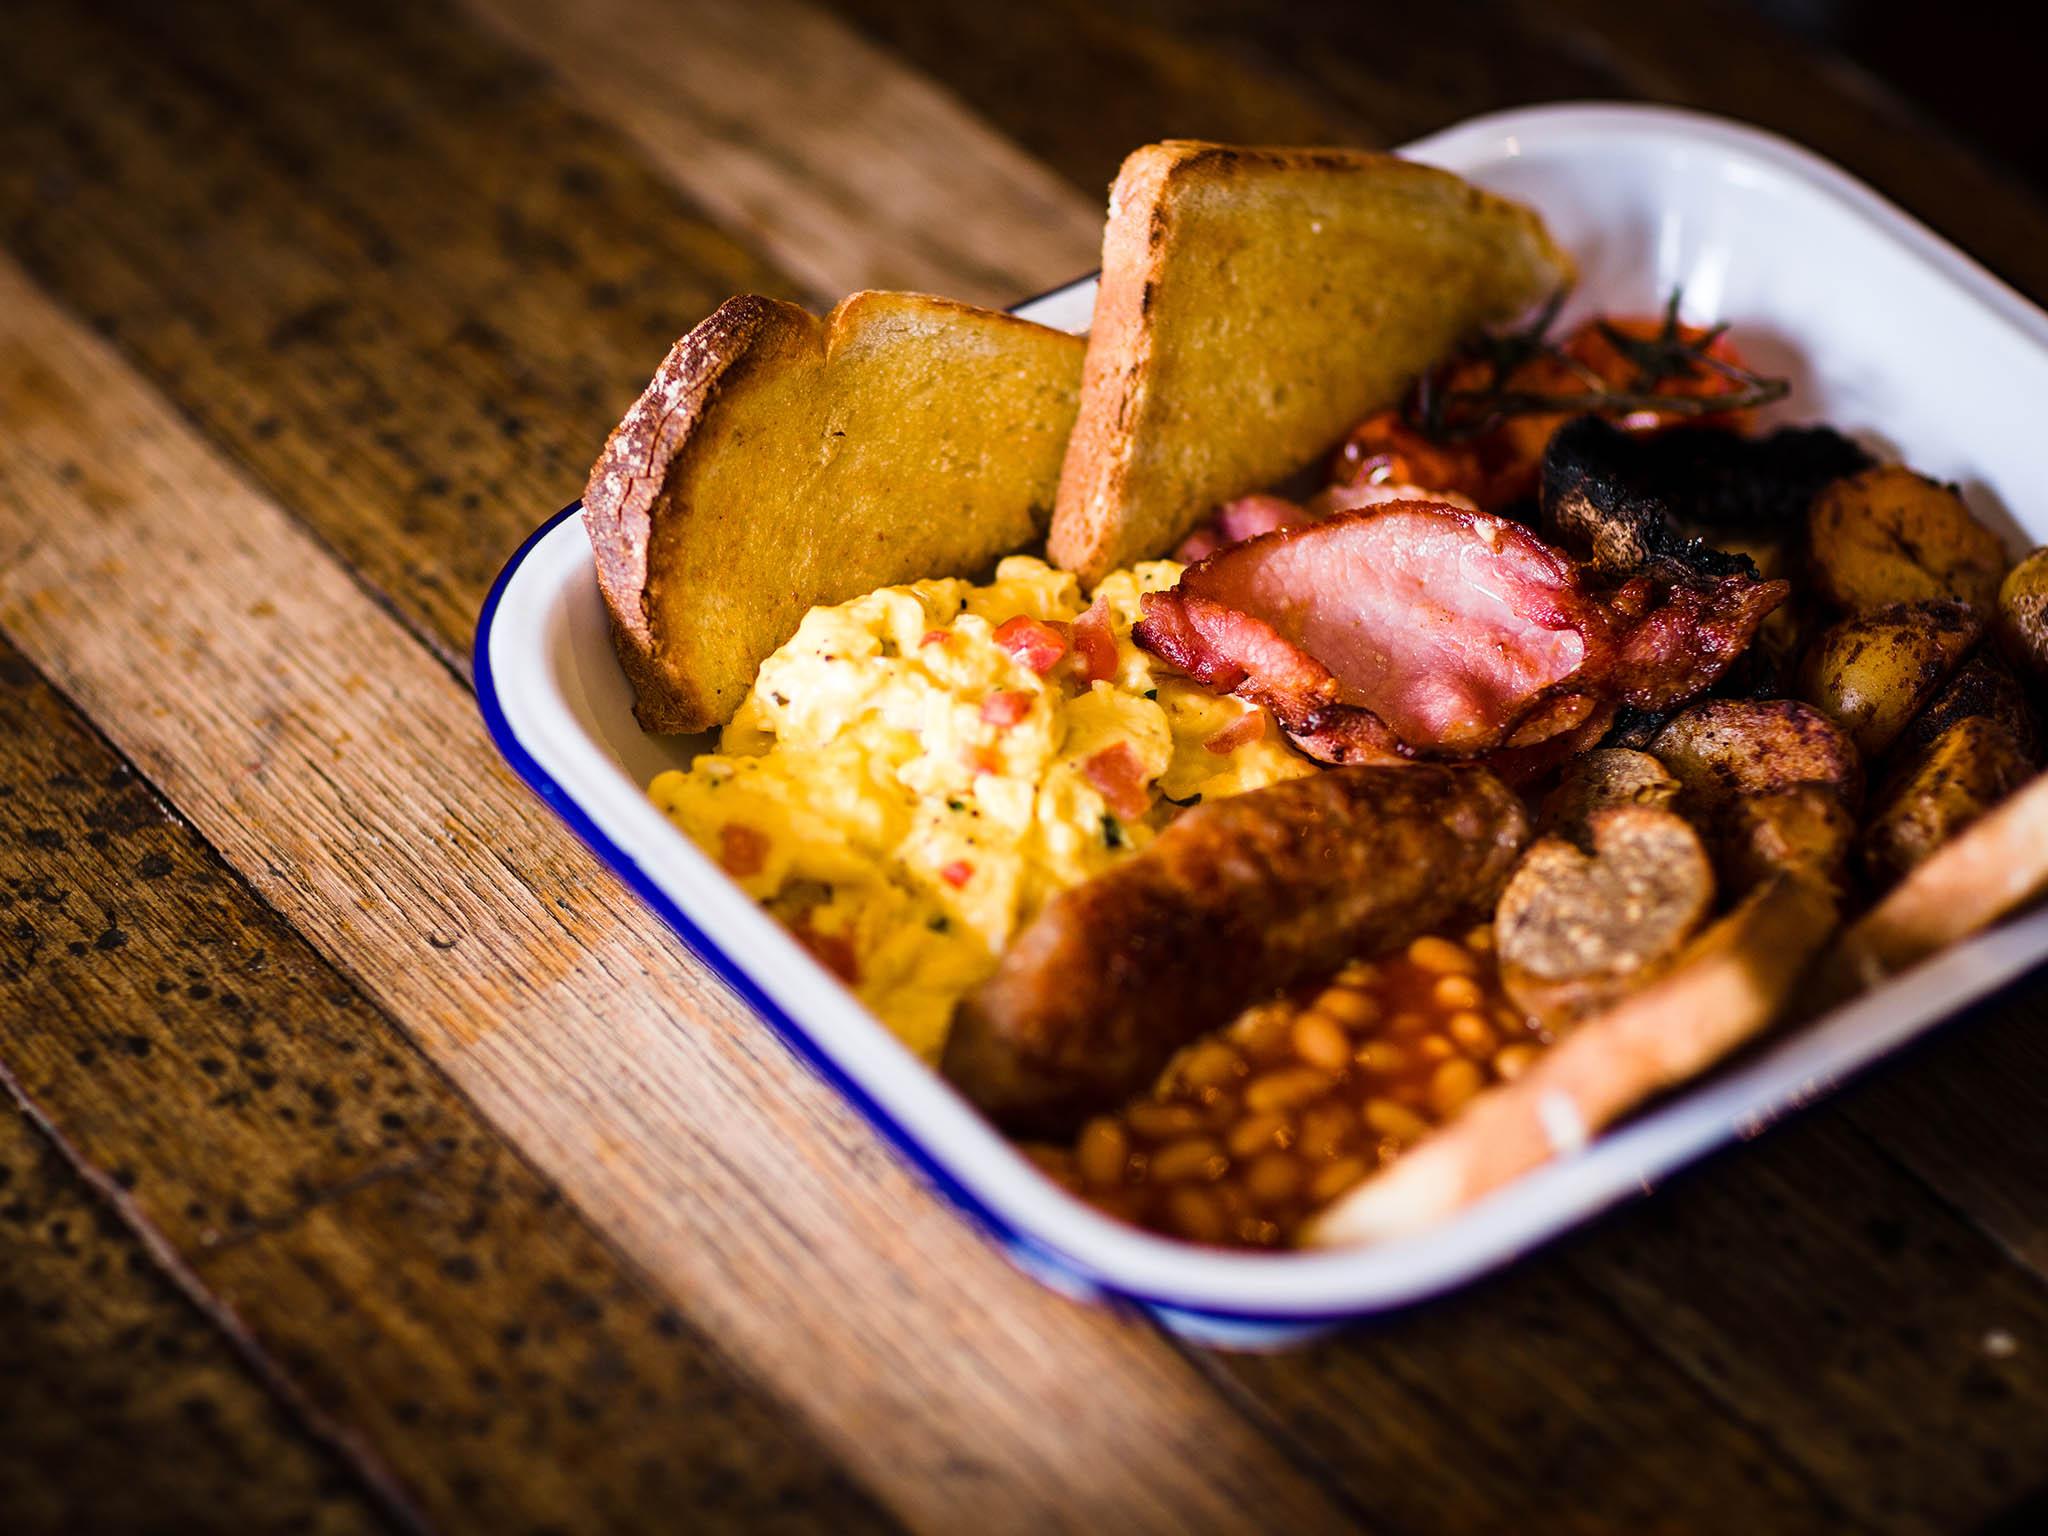 The Big Boss is packed with all the breakfast essentials, perfect for those who are hungover